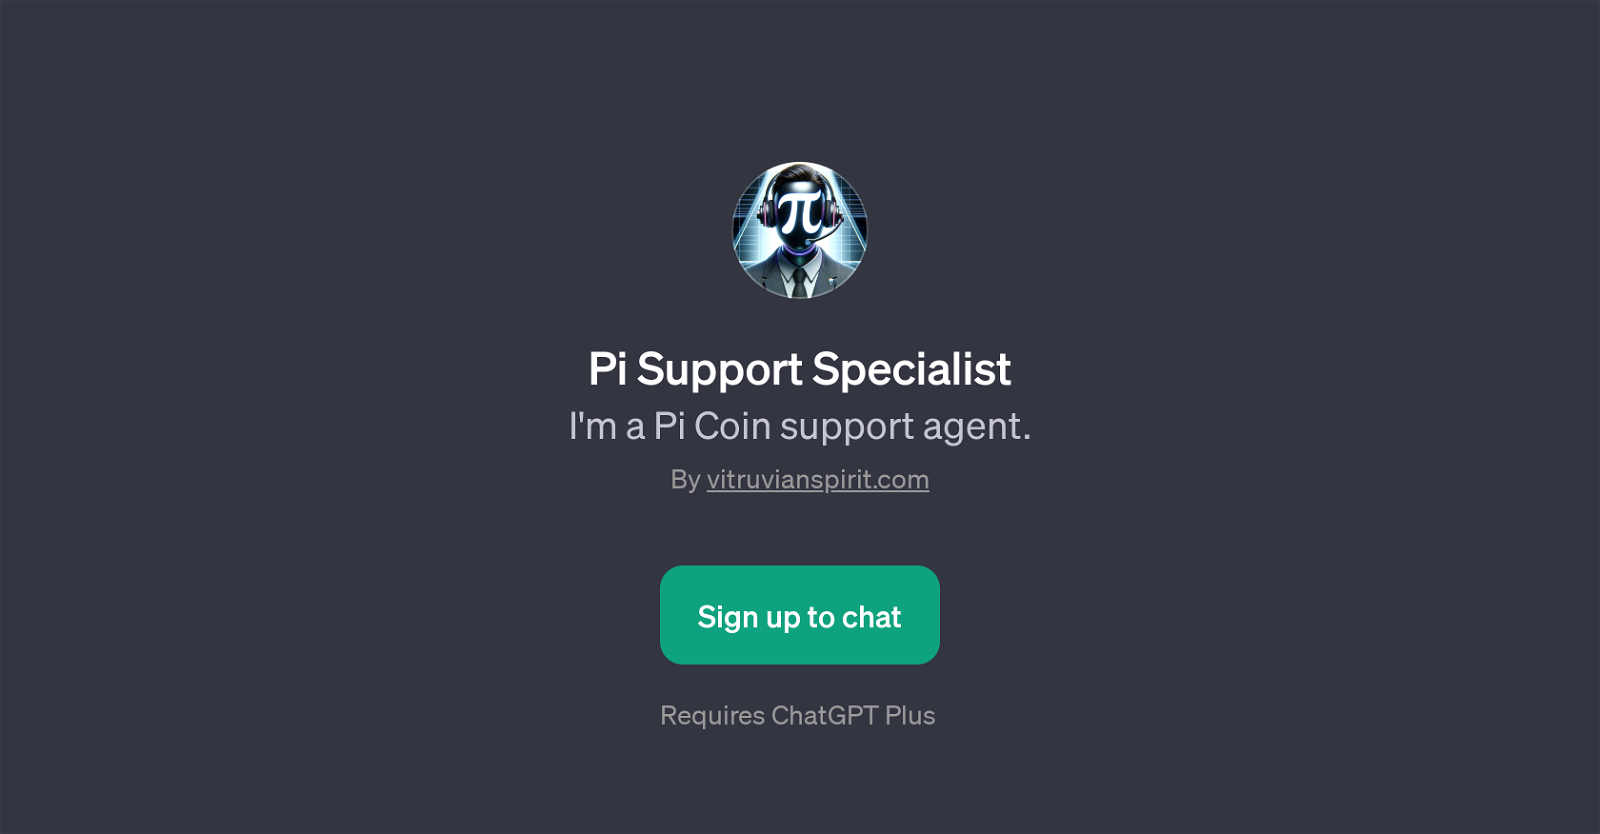 Pi Support Specialist website